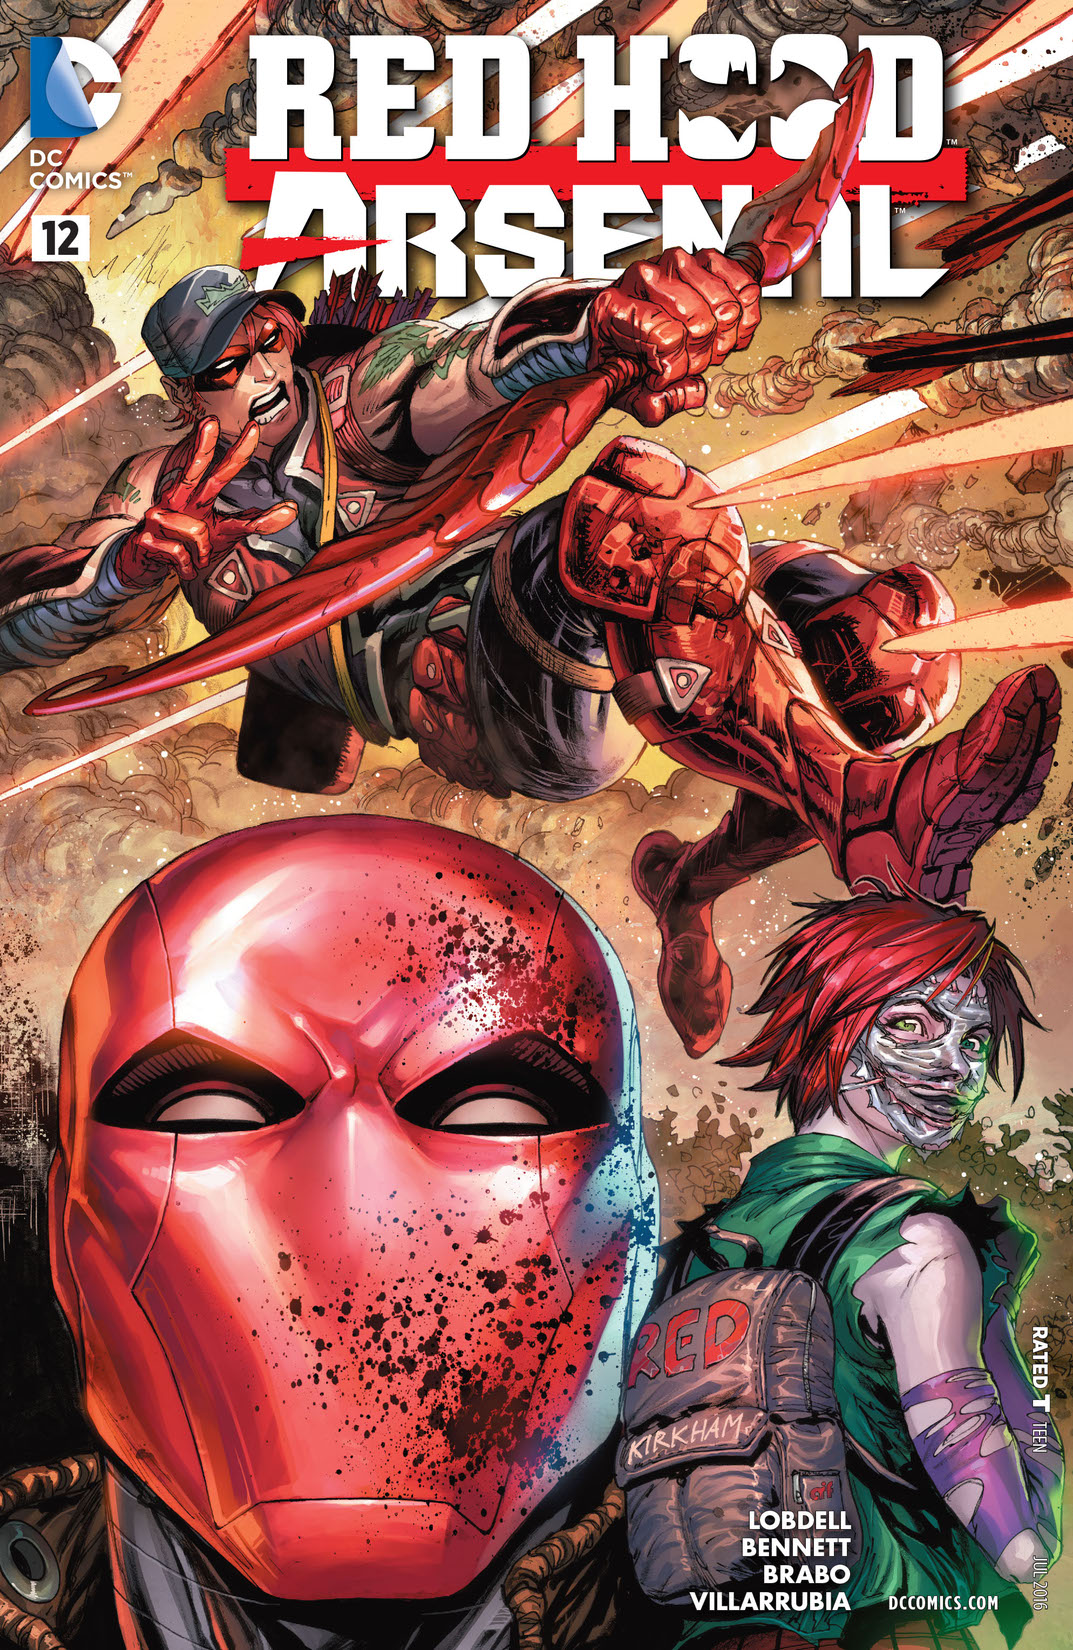 Red Hood/Arsenal #12 preview images